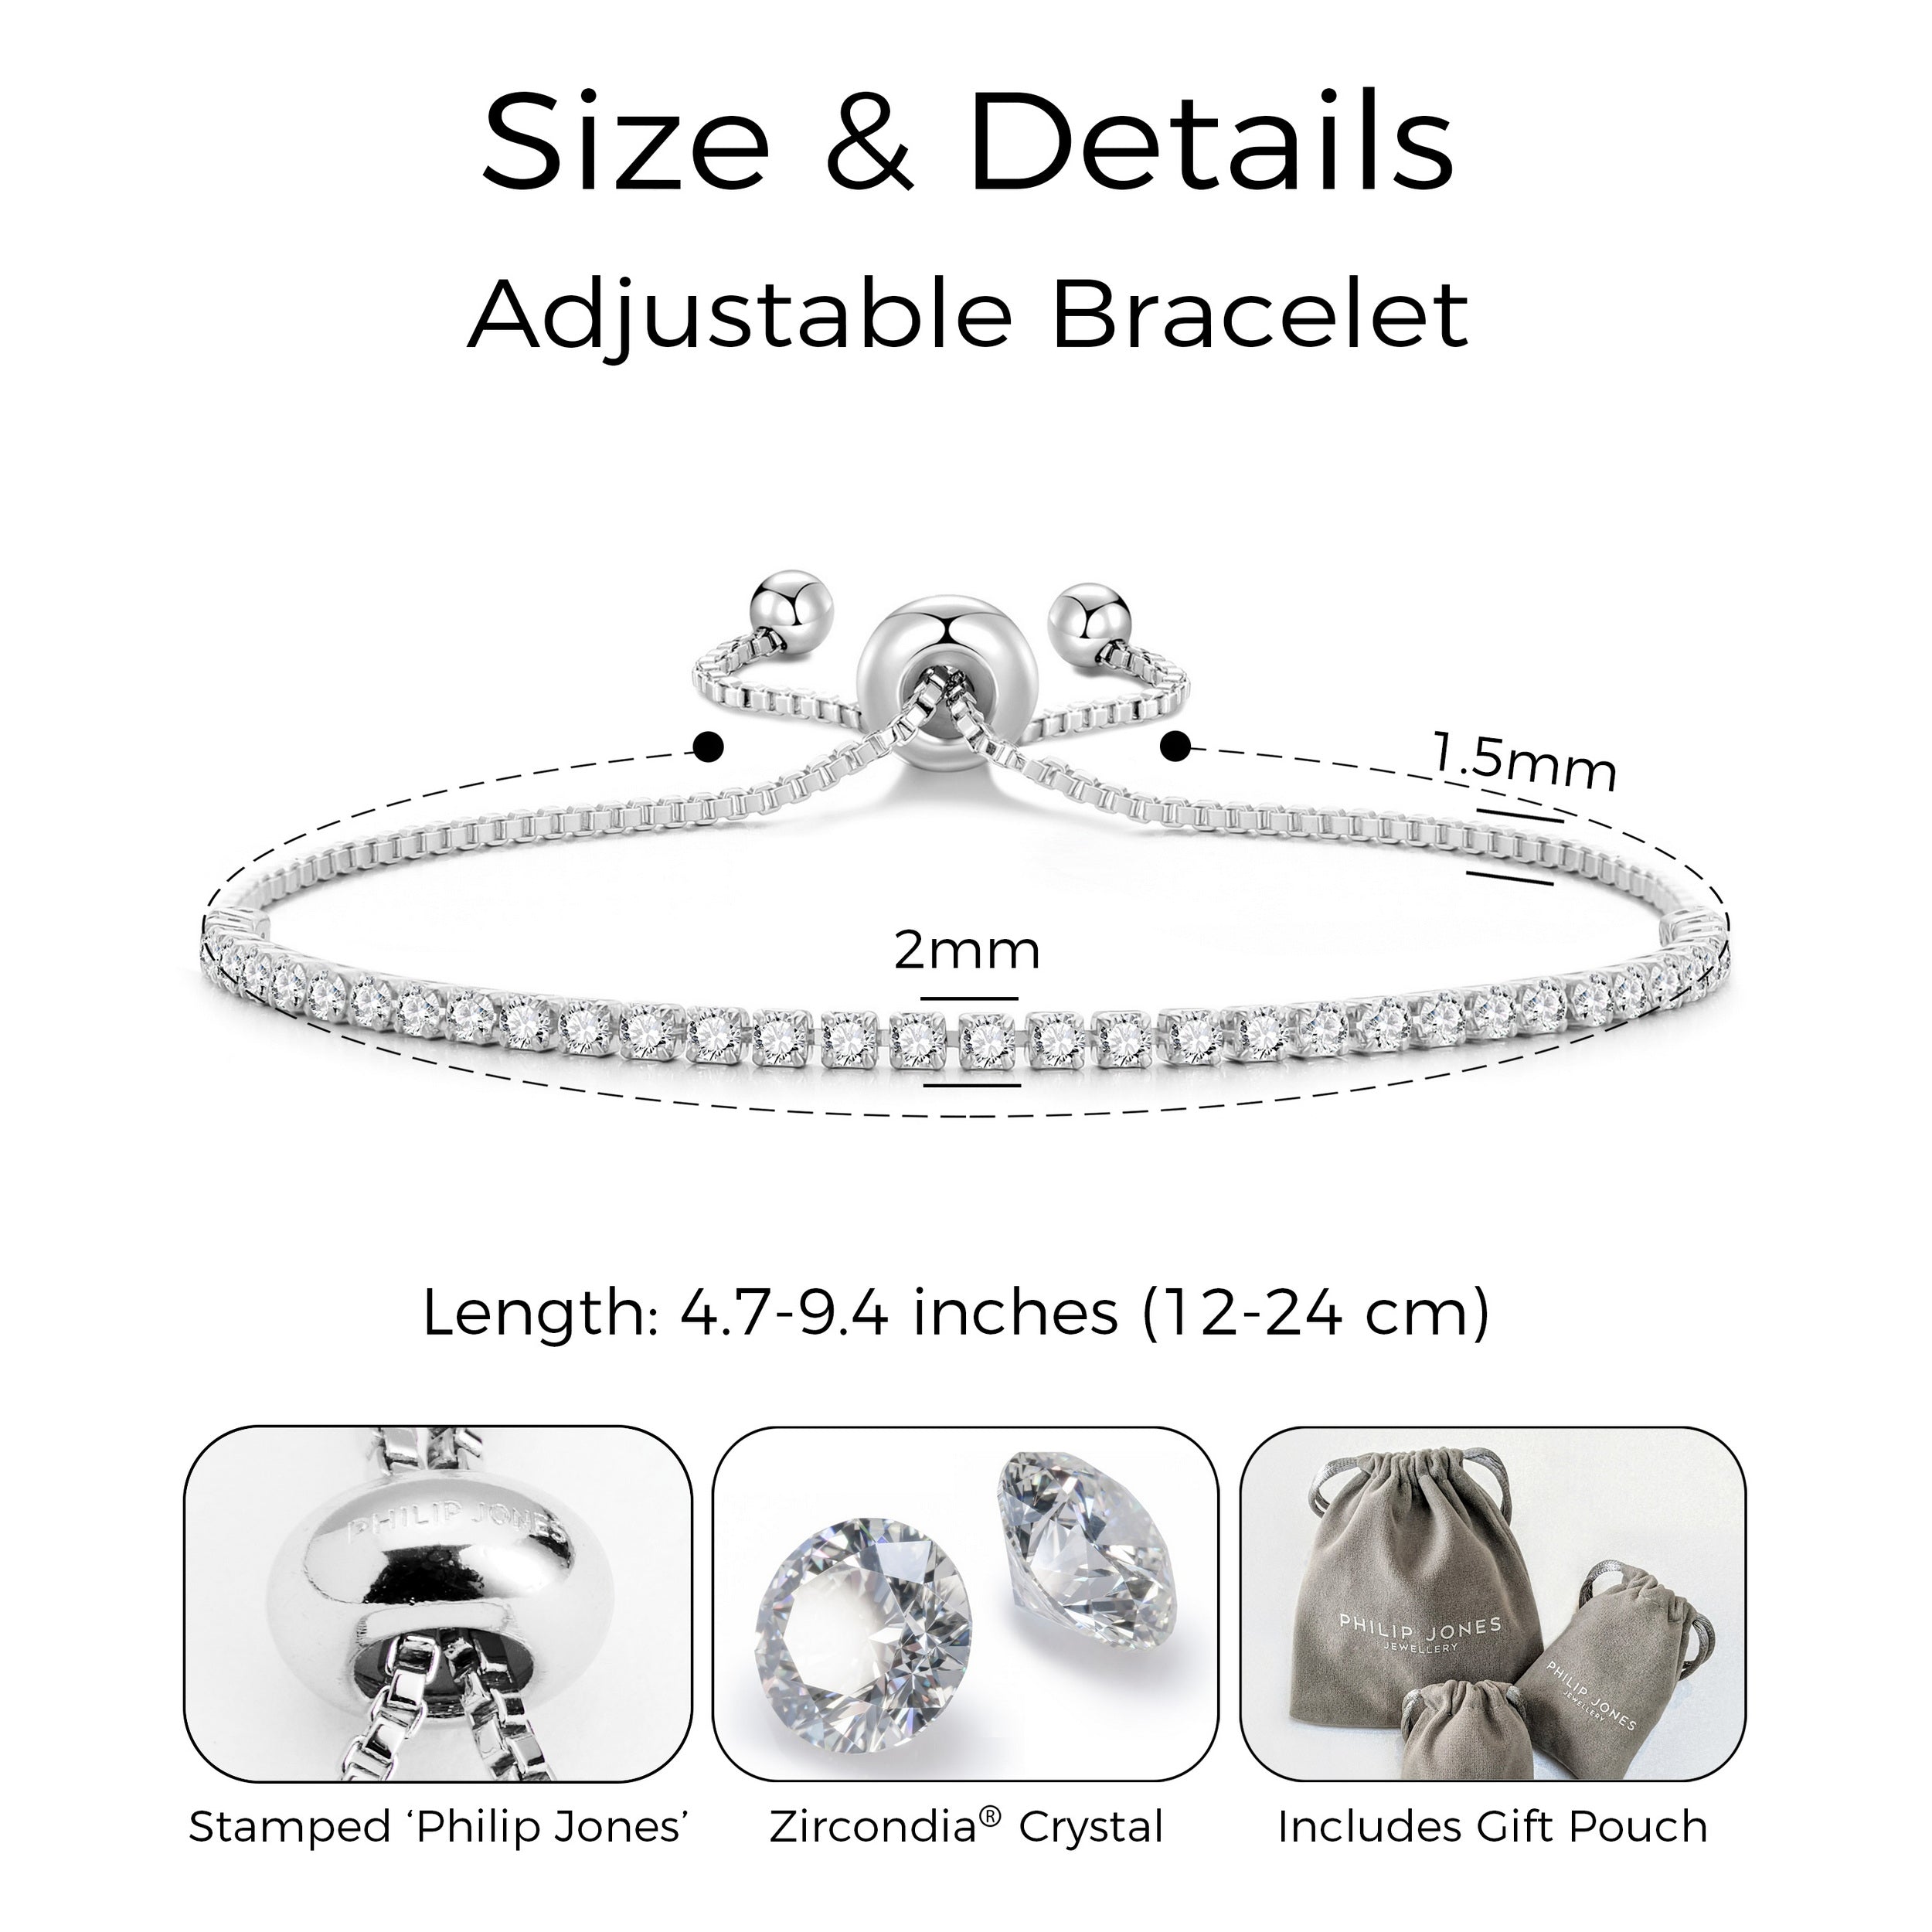 Silver Plated 2mm Adjustable Tennis Bracelet Created with Zircondia® Crystals